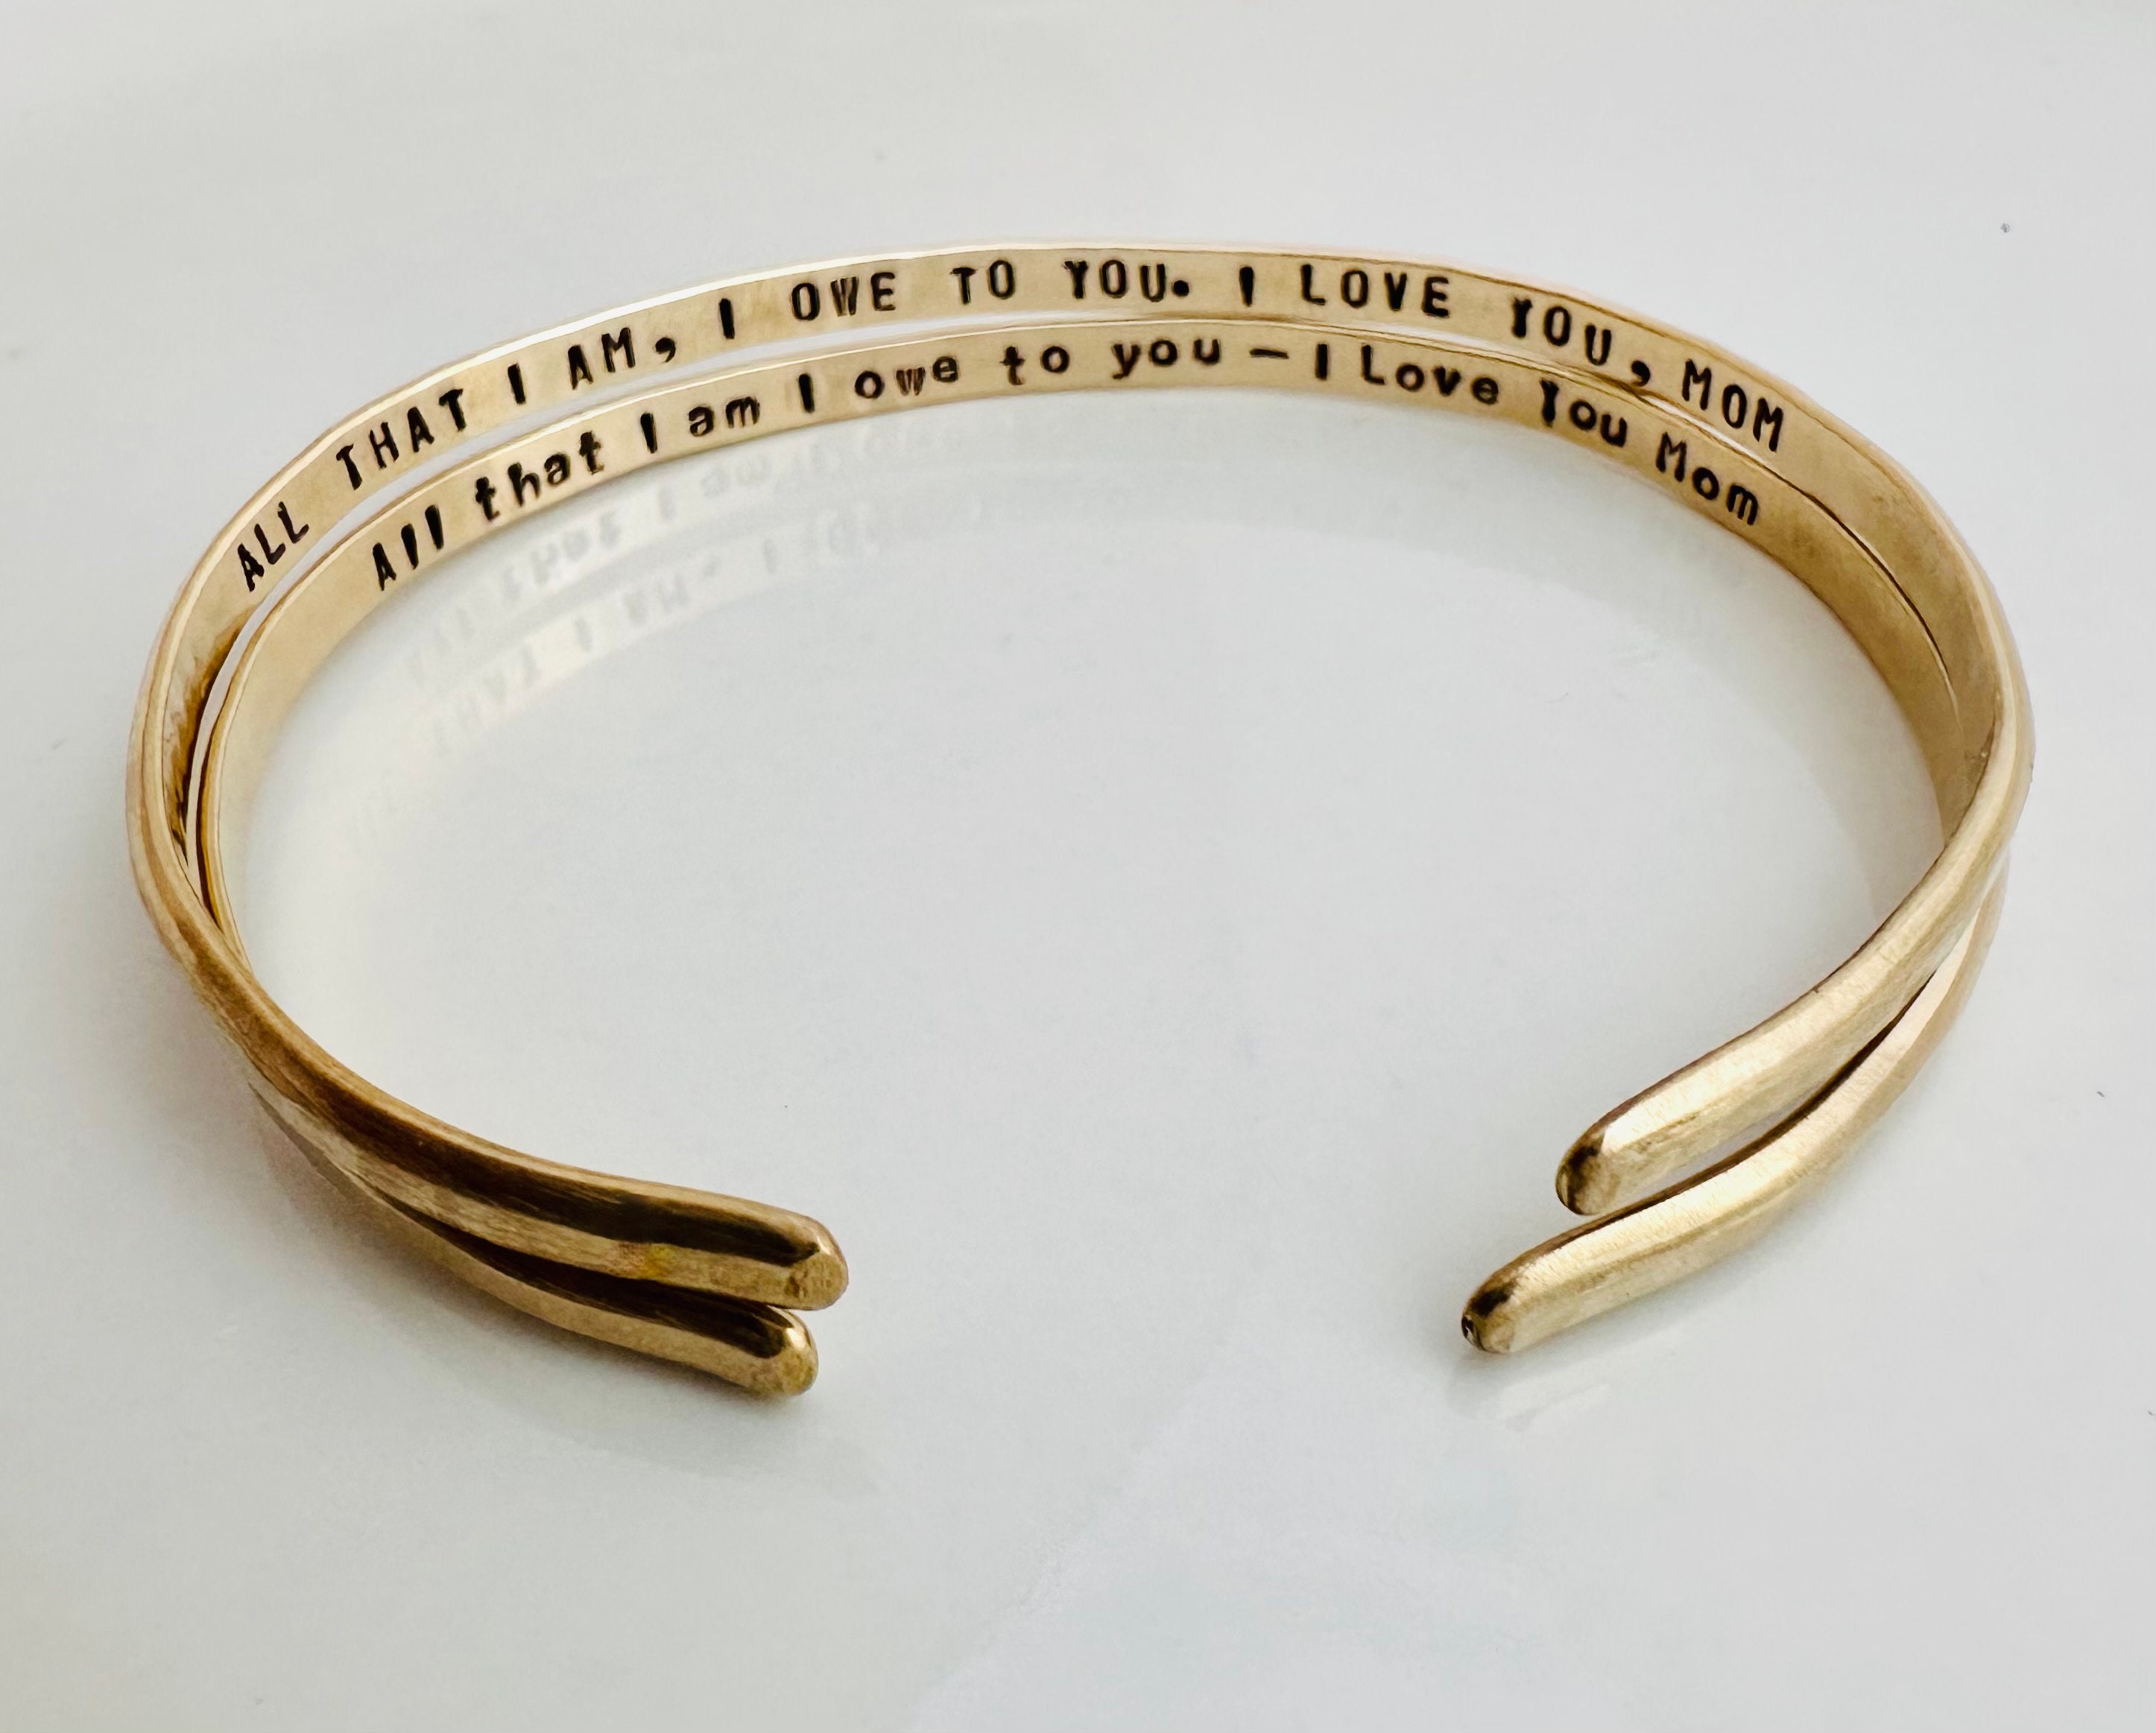 Amazon.com: Your Own Text, Customized Cuff, Inspirational Gift, Engraved  Cuff, Personalize Bracelet, Skinny Bangle (Color: gold, Engrave outside,  inside or both sides of cuff: outside engrave only) : Handmade Products